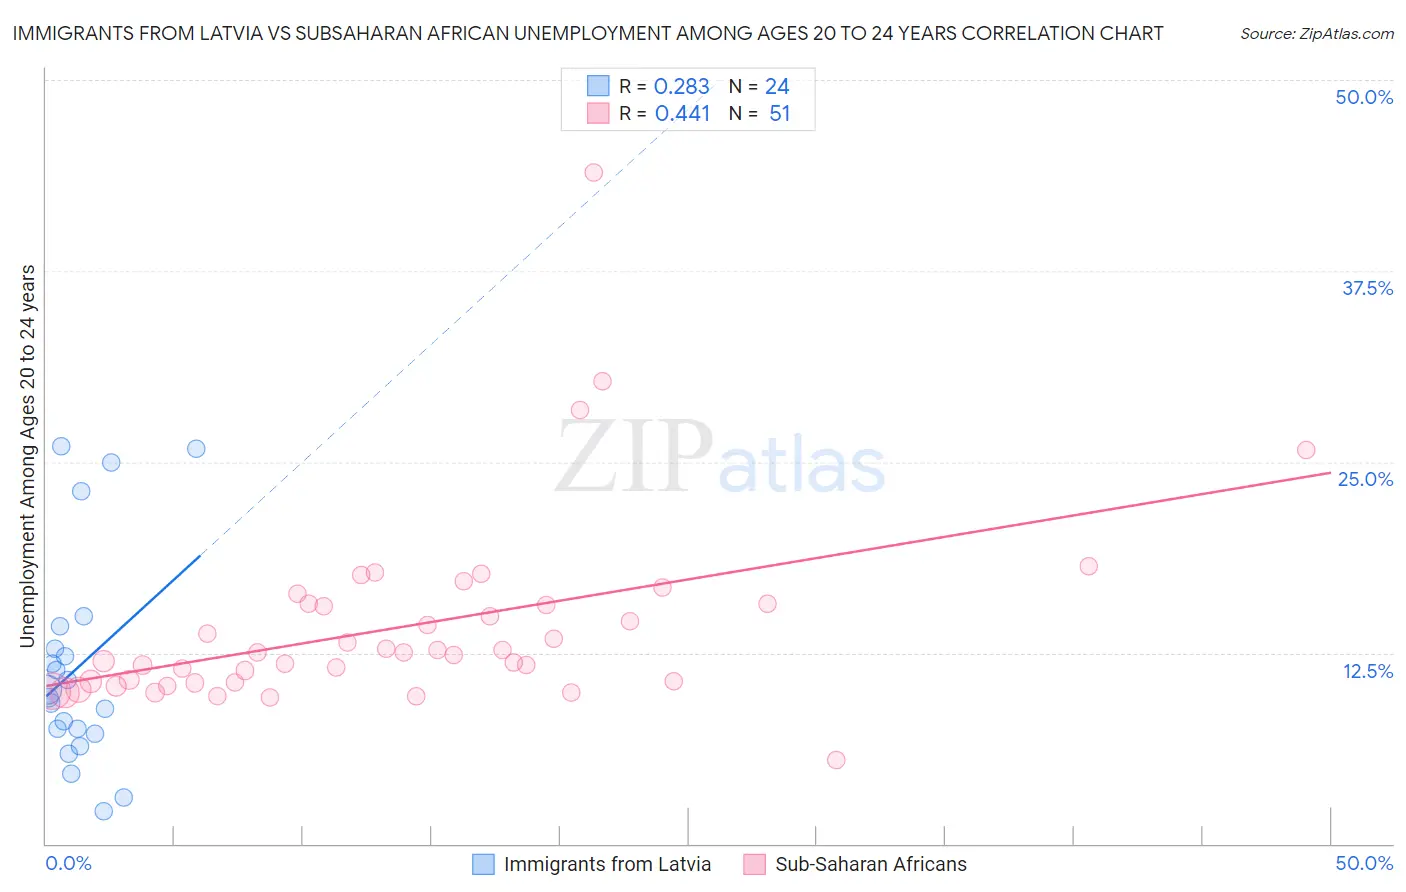 Immigrants from Latvia vs Subsaharan African Unemployment Among Ages 20 to 24 years